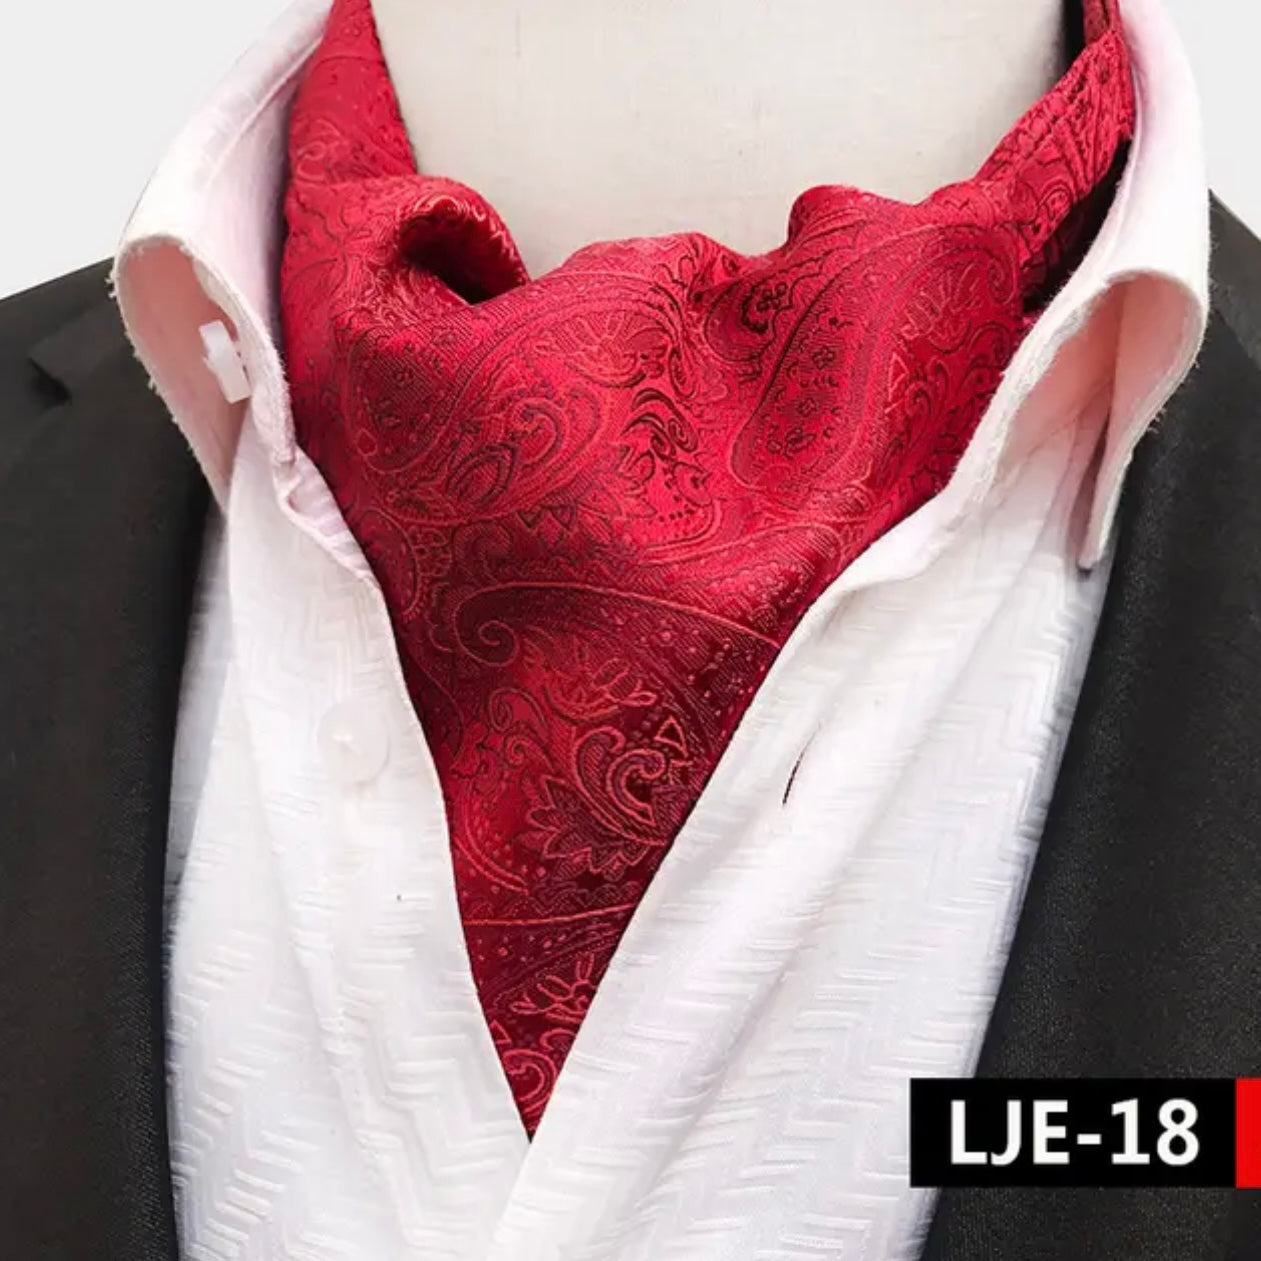 Red and Blue Floral Paisley Jacquard Wooven Ascot Cravat Tie For Men ...